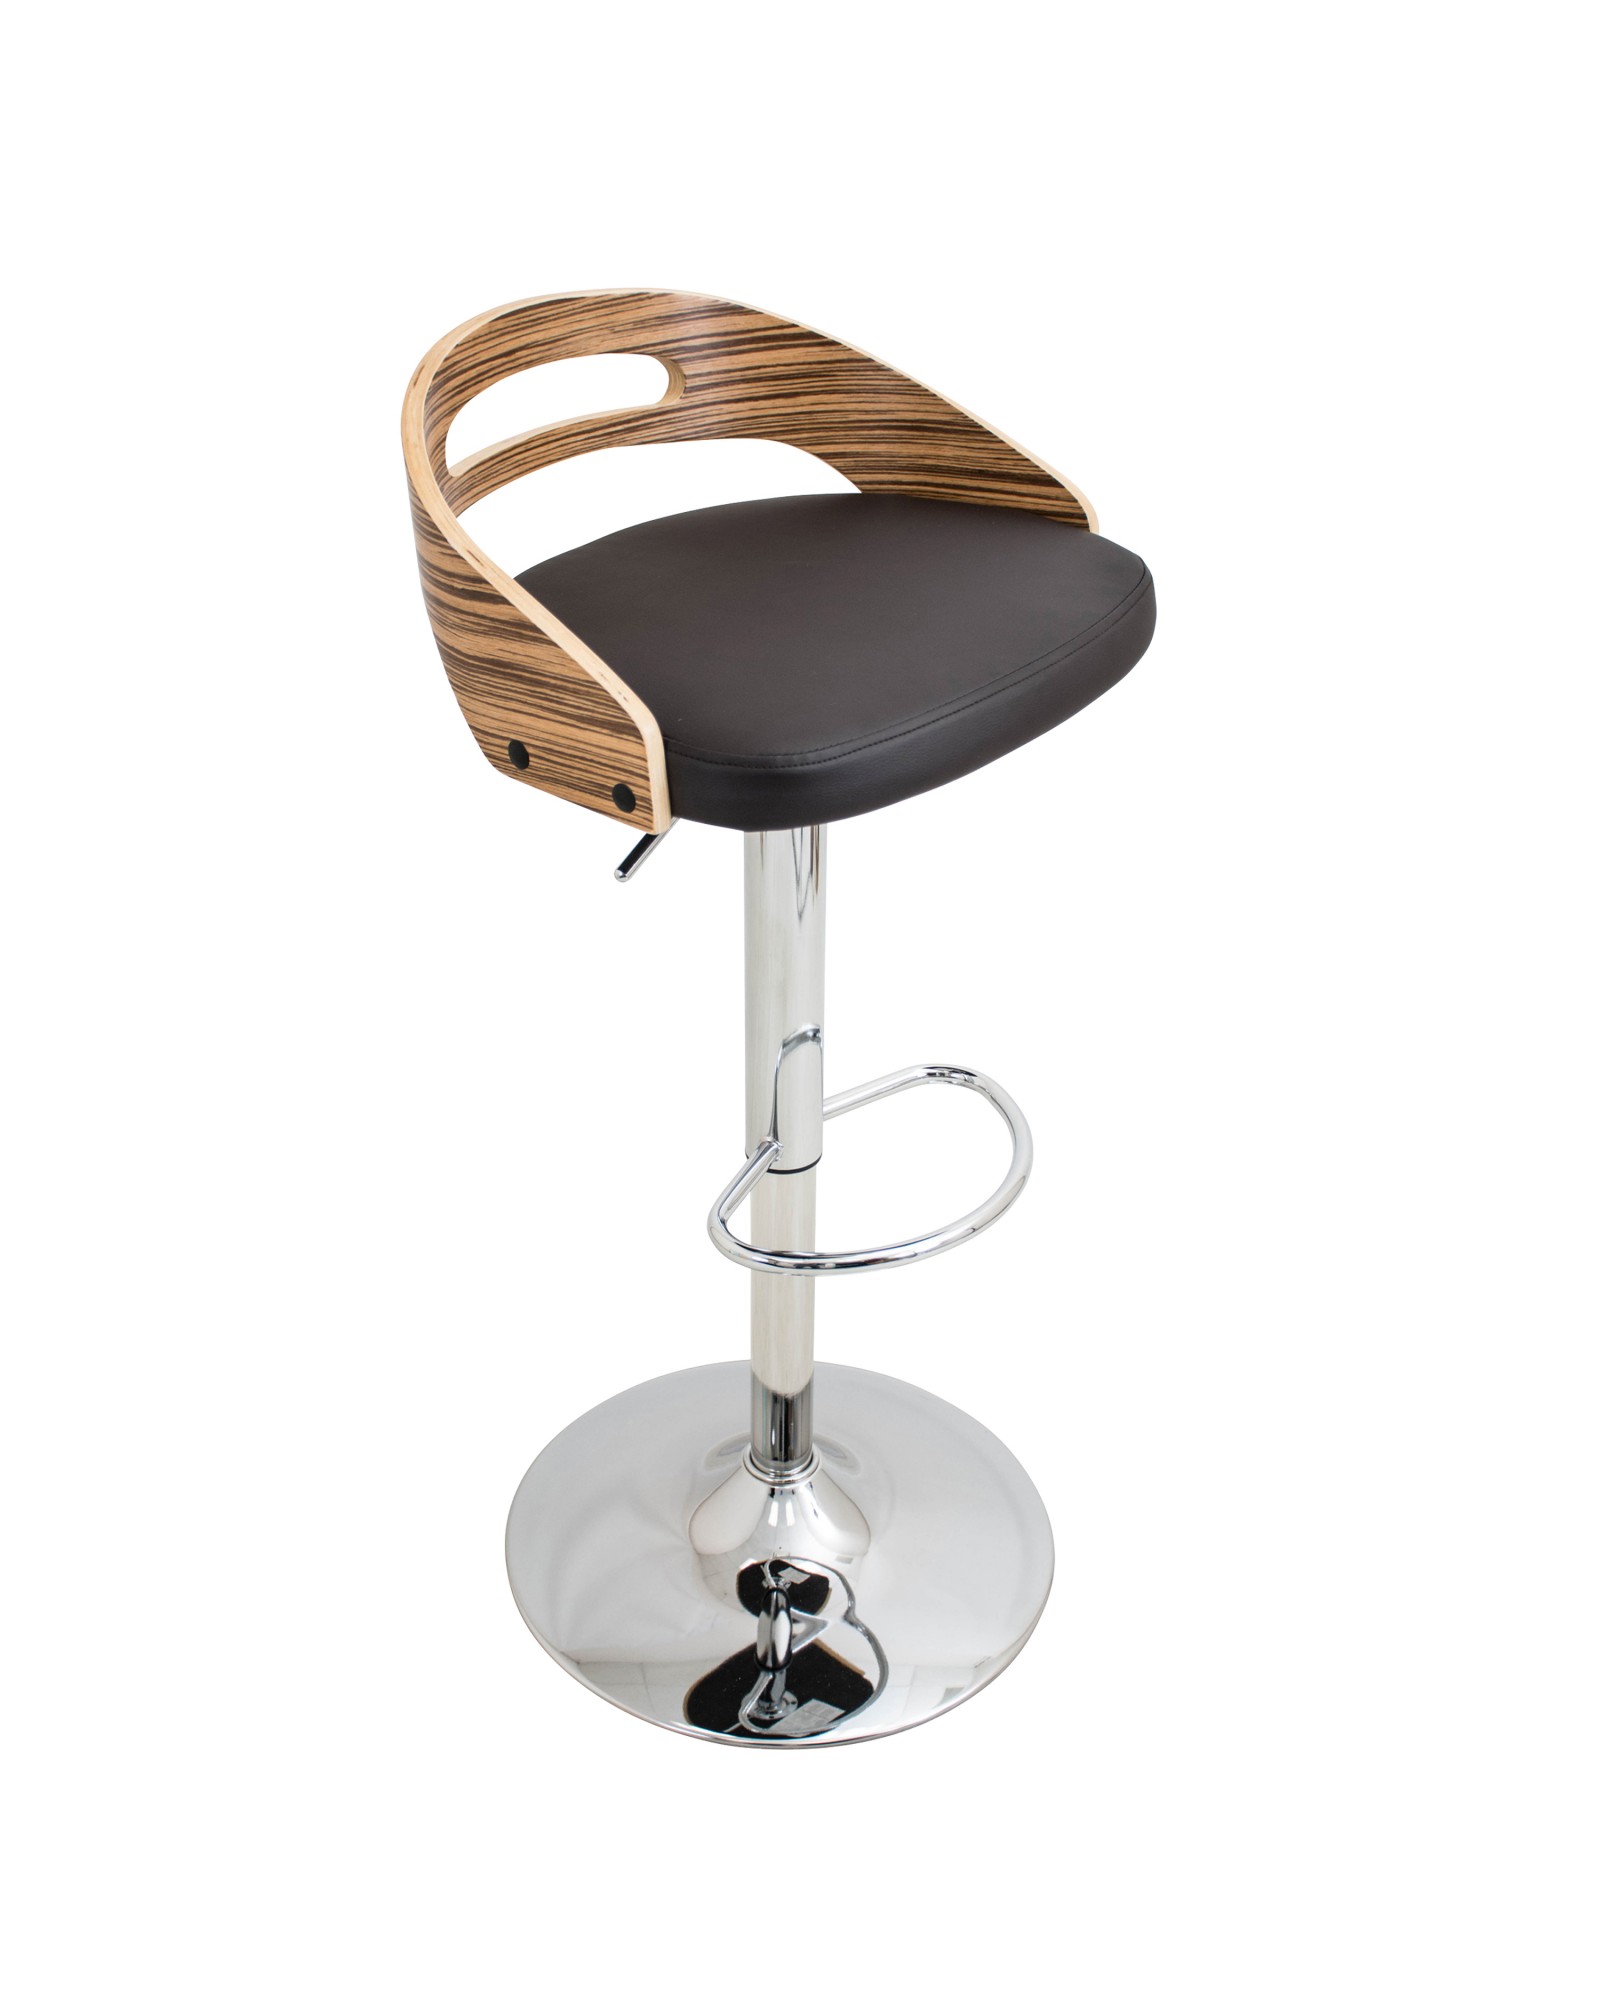 Cassis Mid-Century Modern Adjustable Barstool with Swivel in Zebra and Brown Faux Leather